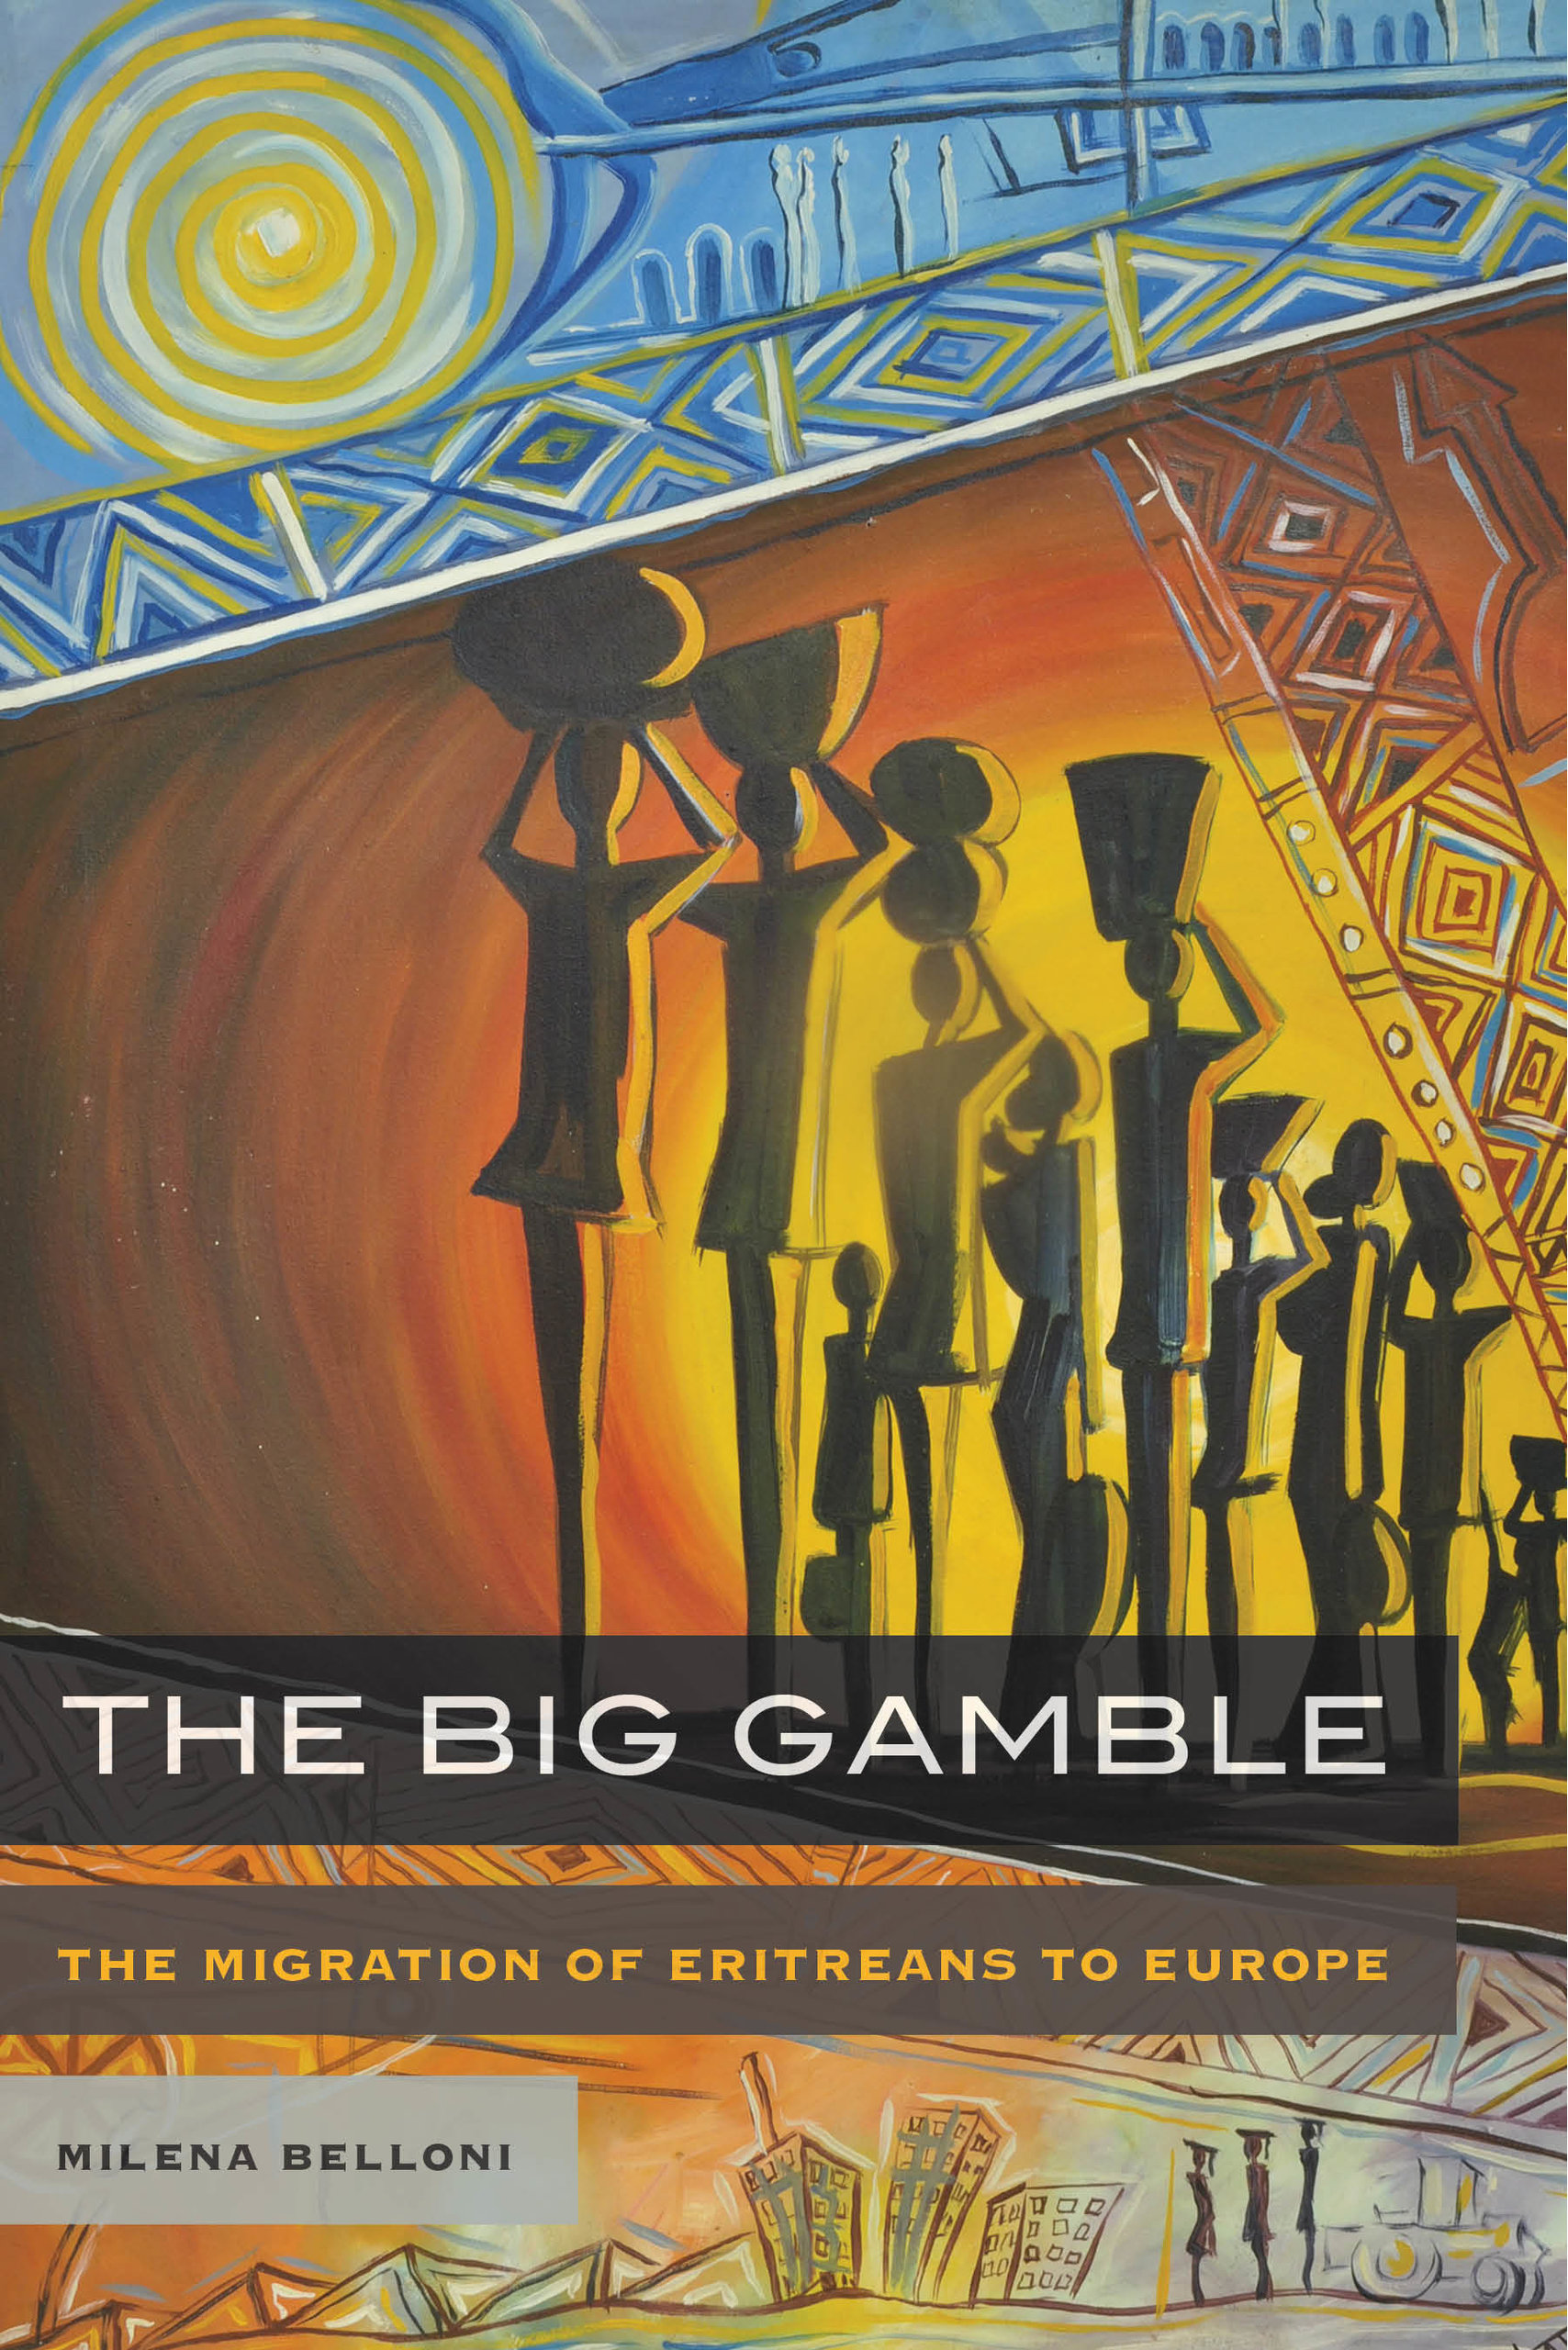 a picture of art featuring women carrying vases, book cover of "The Big Gamble: The Migration of Eritreans to Europe" by Milena Belloni